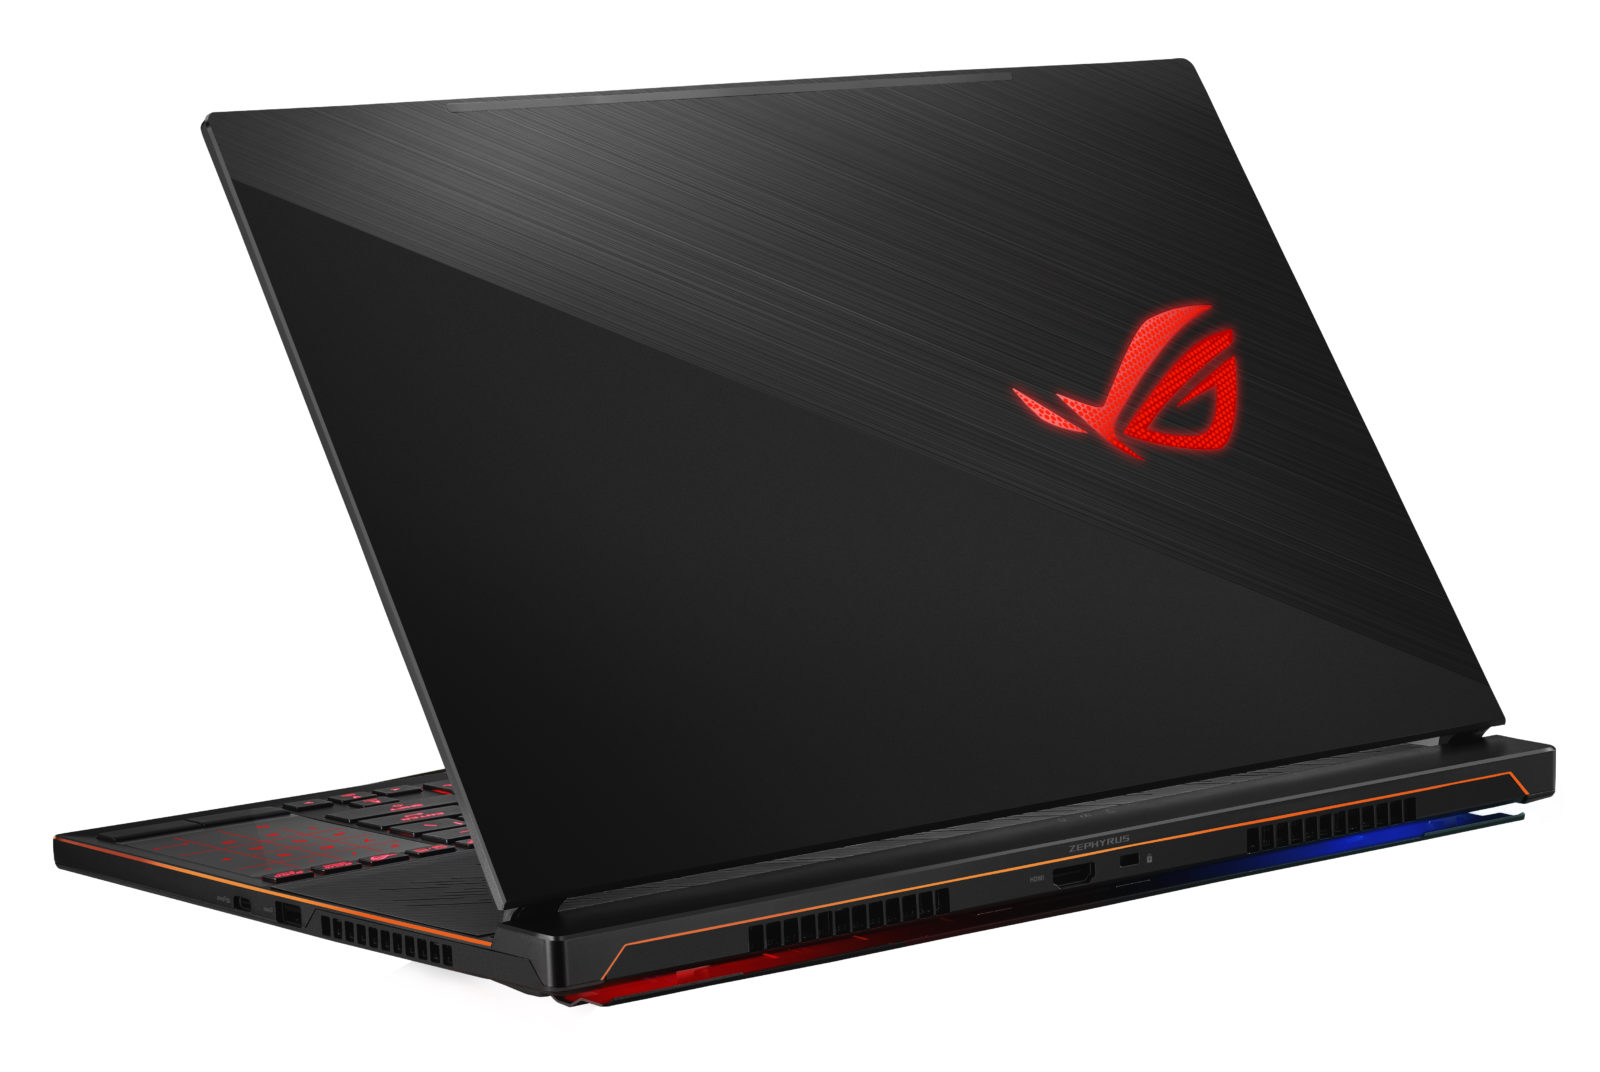 Asus Launches World Thinnest laptop For Gaming – The Twin Post